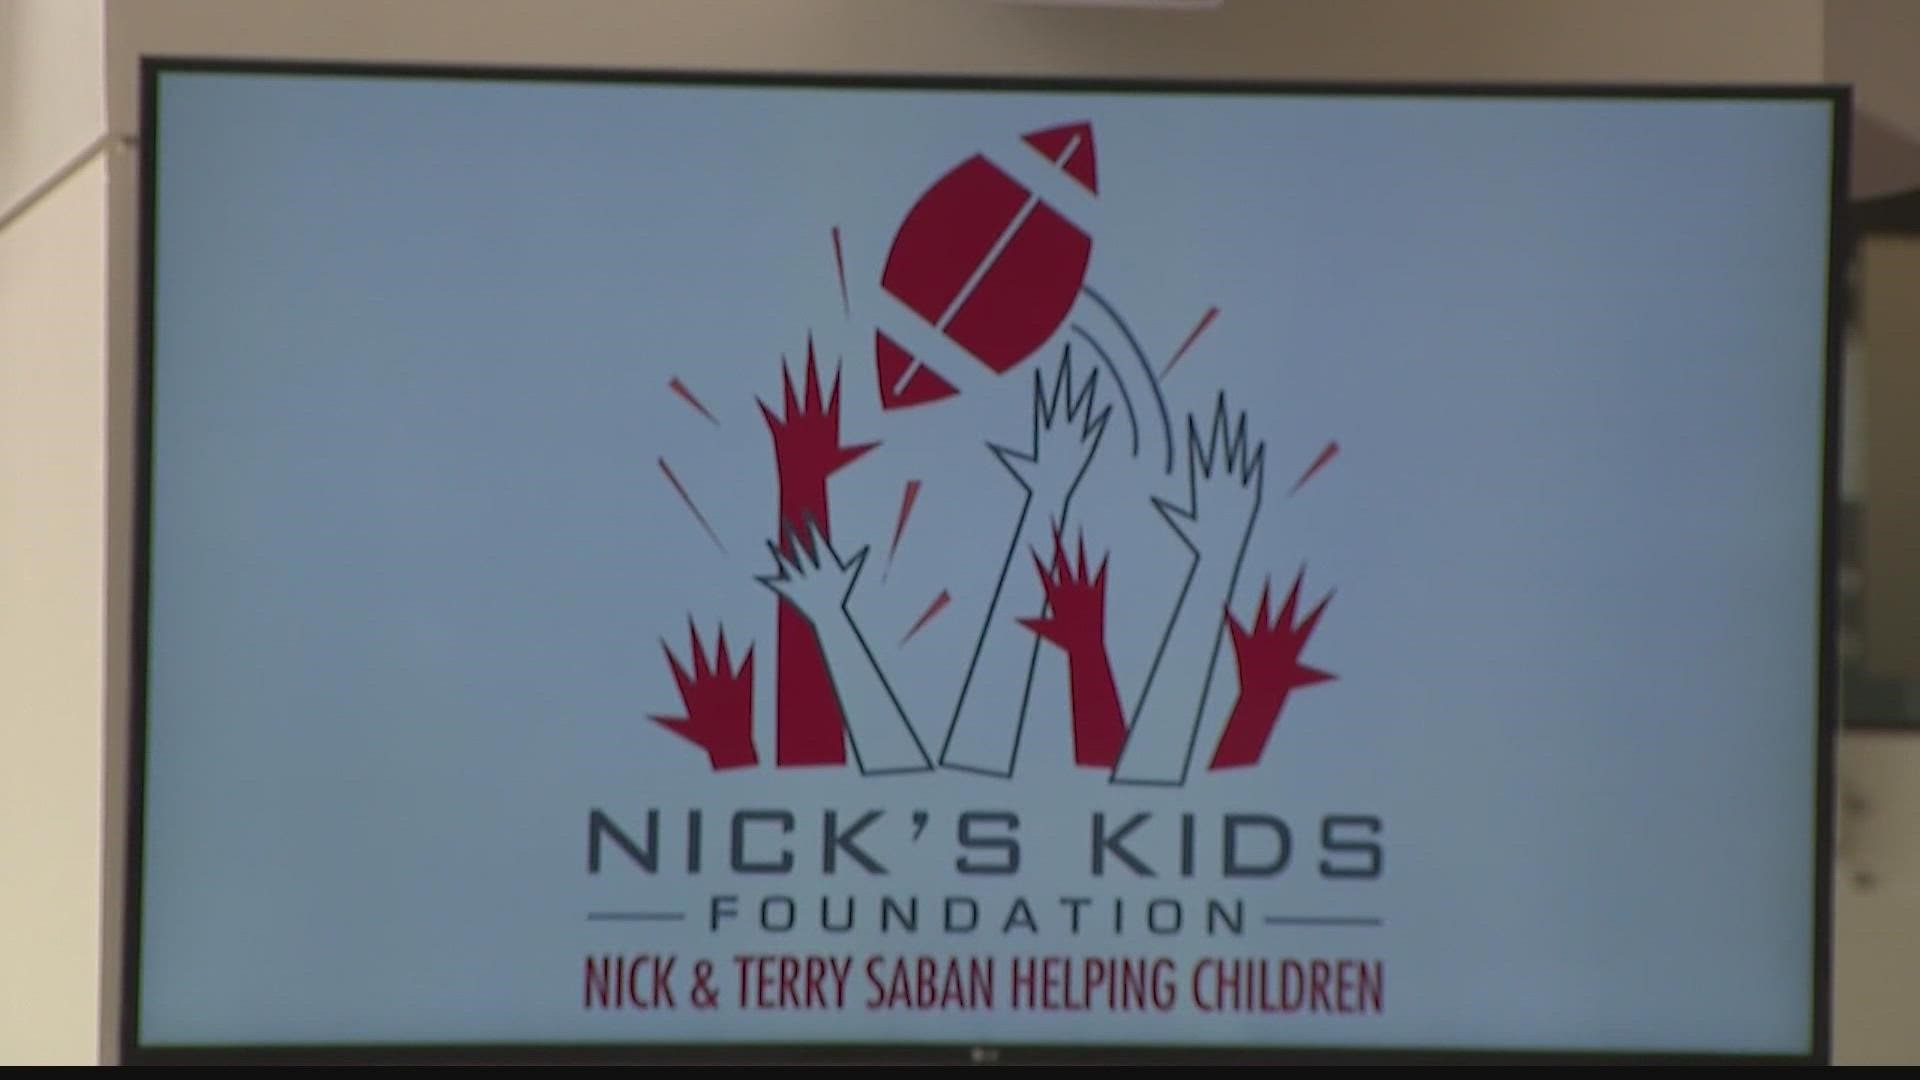 The annual Nick's Kids Foundation Luncheon was held on Wednesday afternoon in The North Zone at Bryant-Denny Stadium with checks totaling just over $572,000.